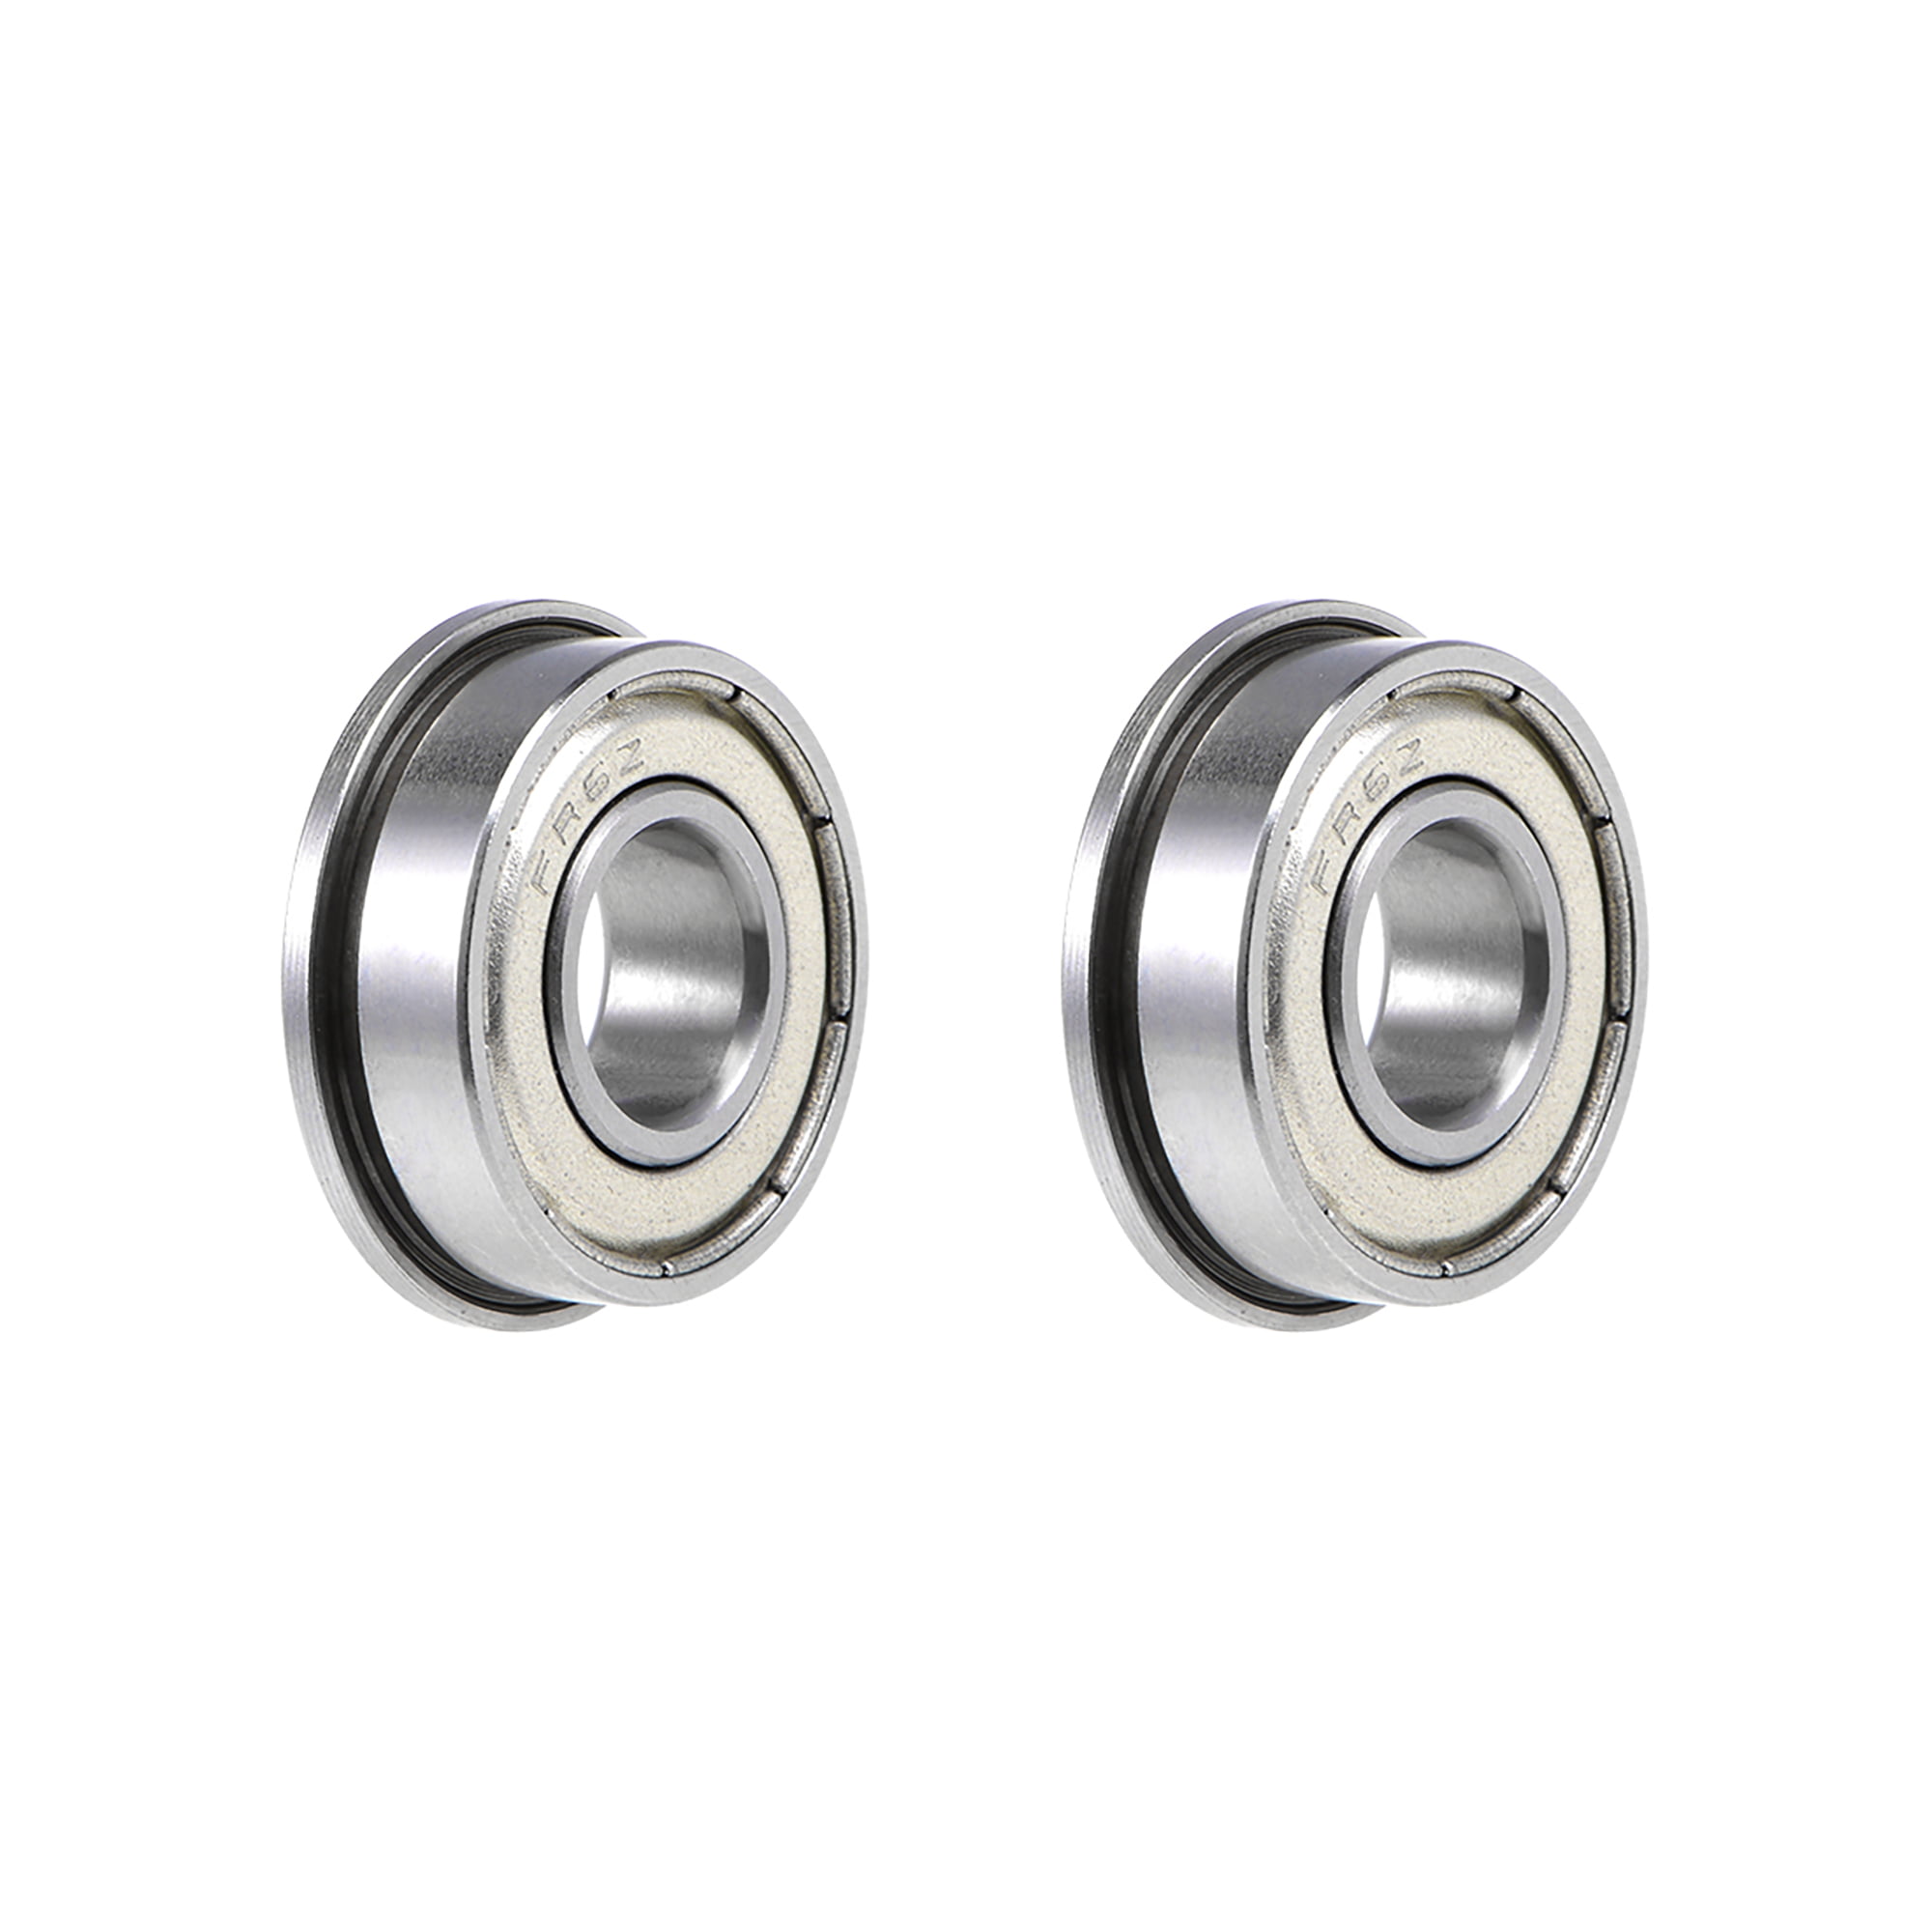 Ball Bearings with Flange FR6ZZ 3//8 inches x 7//8 inches x 9//32 inches Shielded Chrome Bearings 4 Pieces